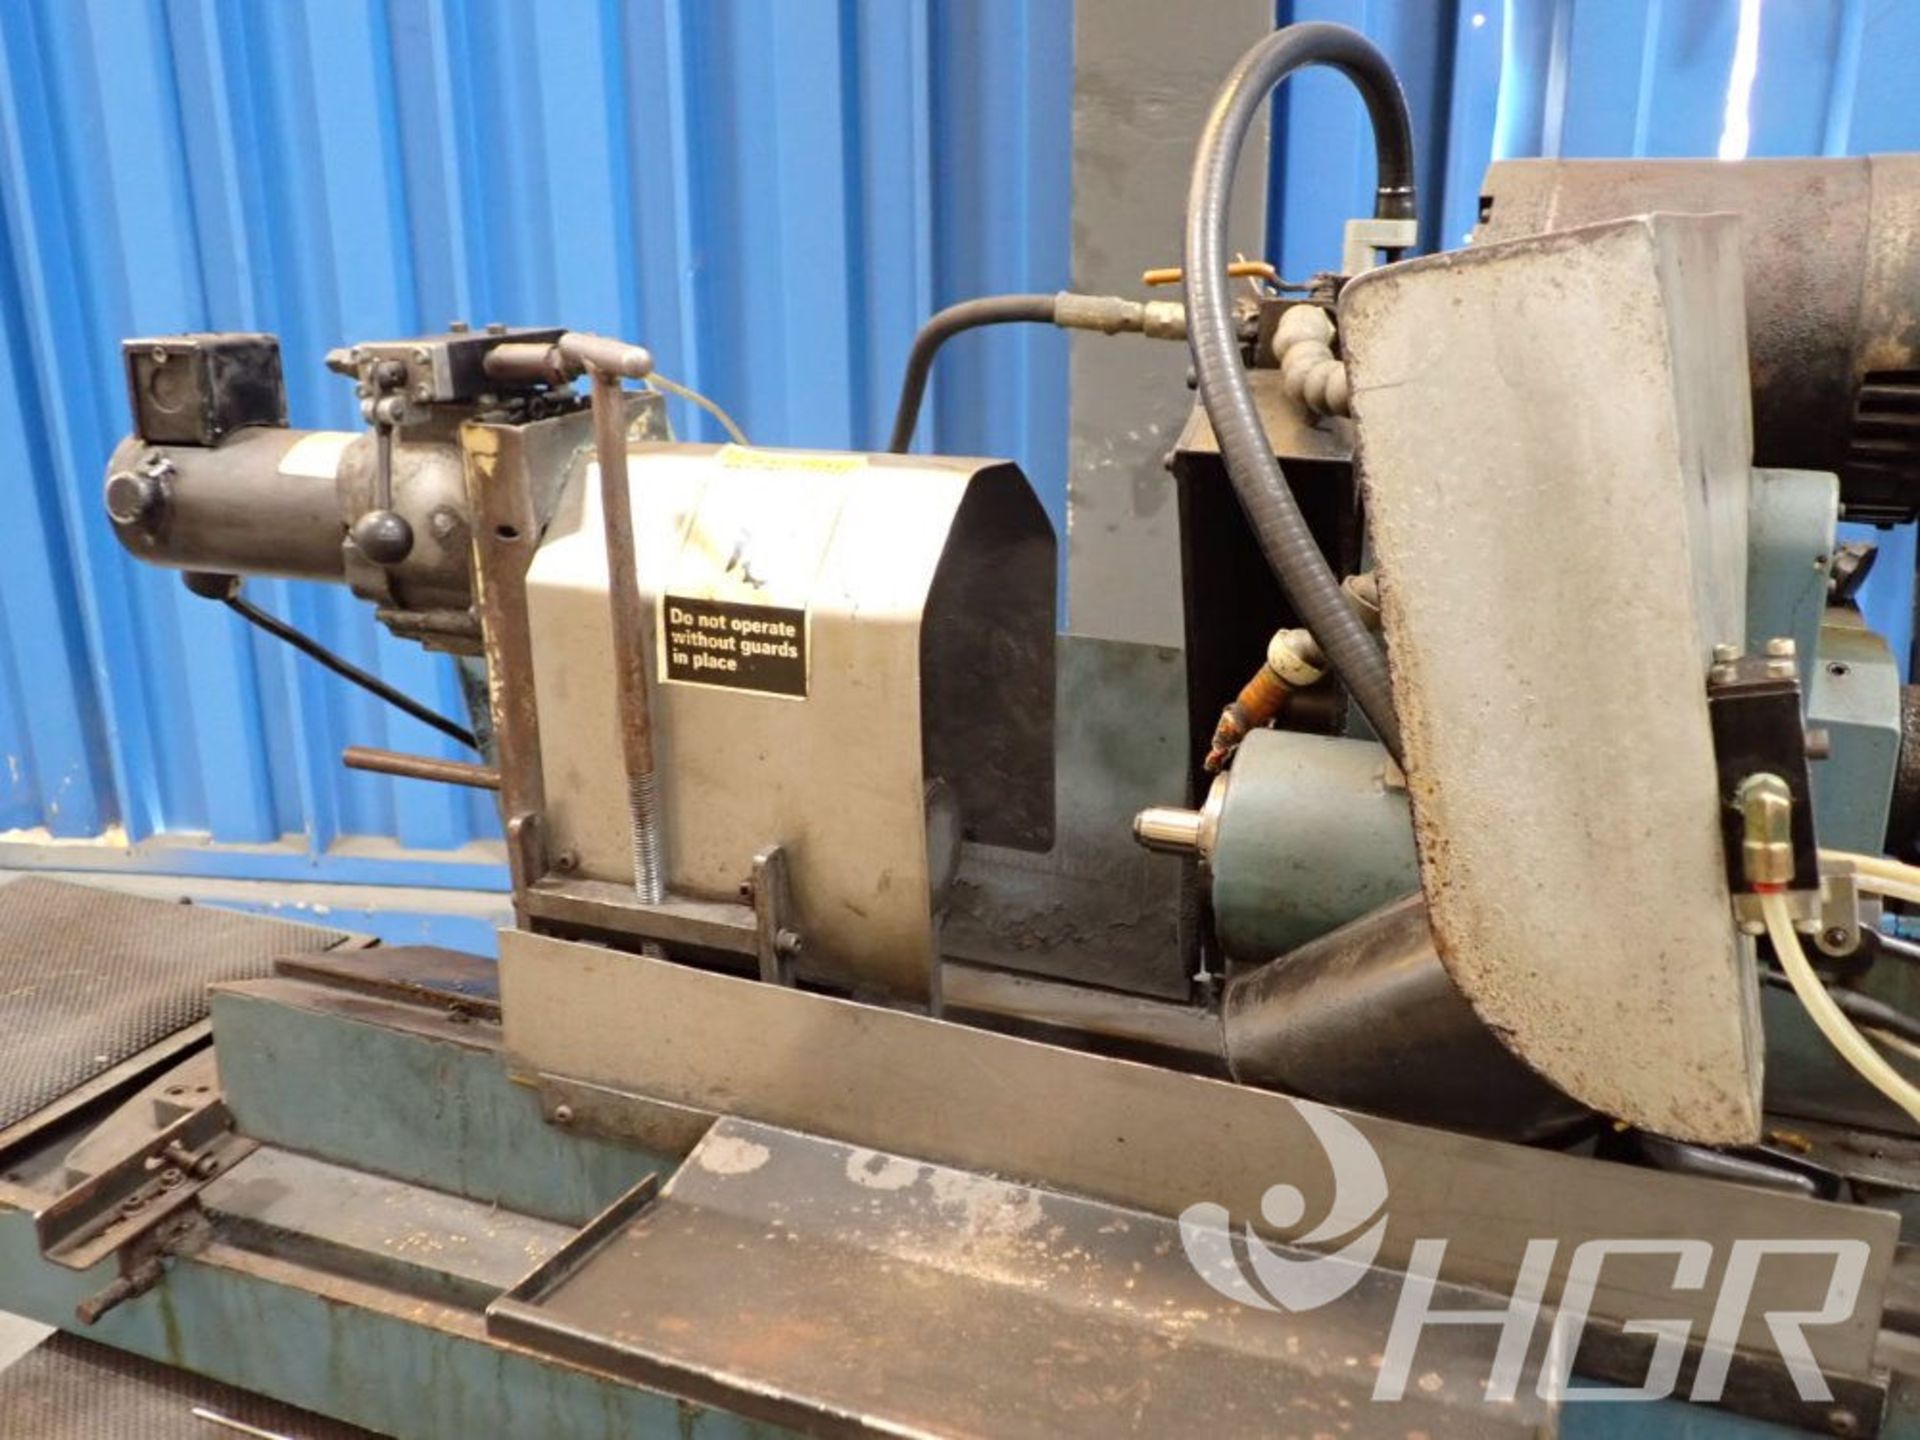 K.O LEE CYLINDRICAL GRINDER, Model C1020L2, Date: n/a; s/n 27475, Approx. Capacity: 5HP , Power: 3/ - Image 8 of 21